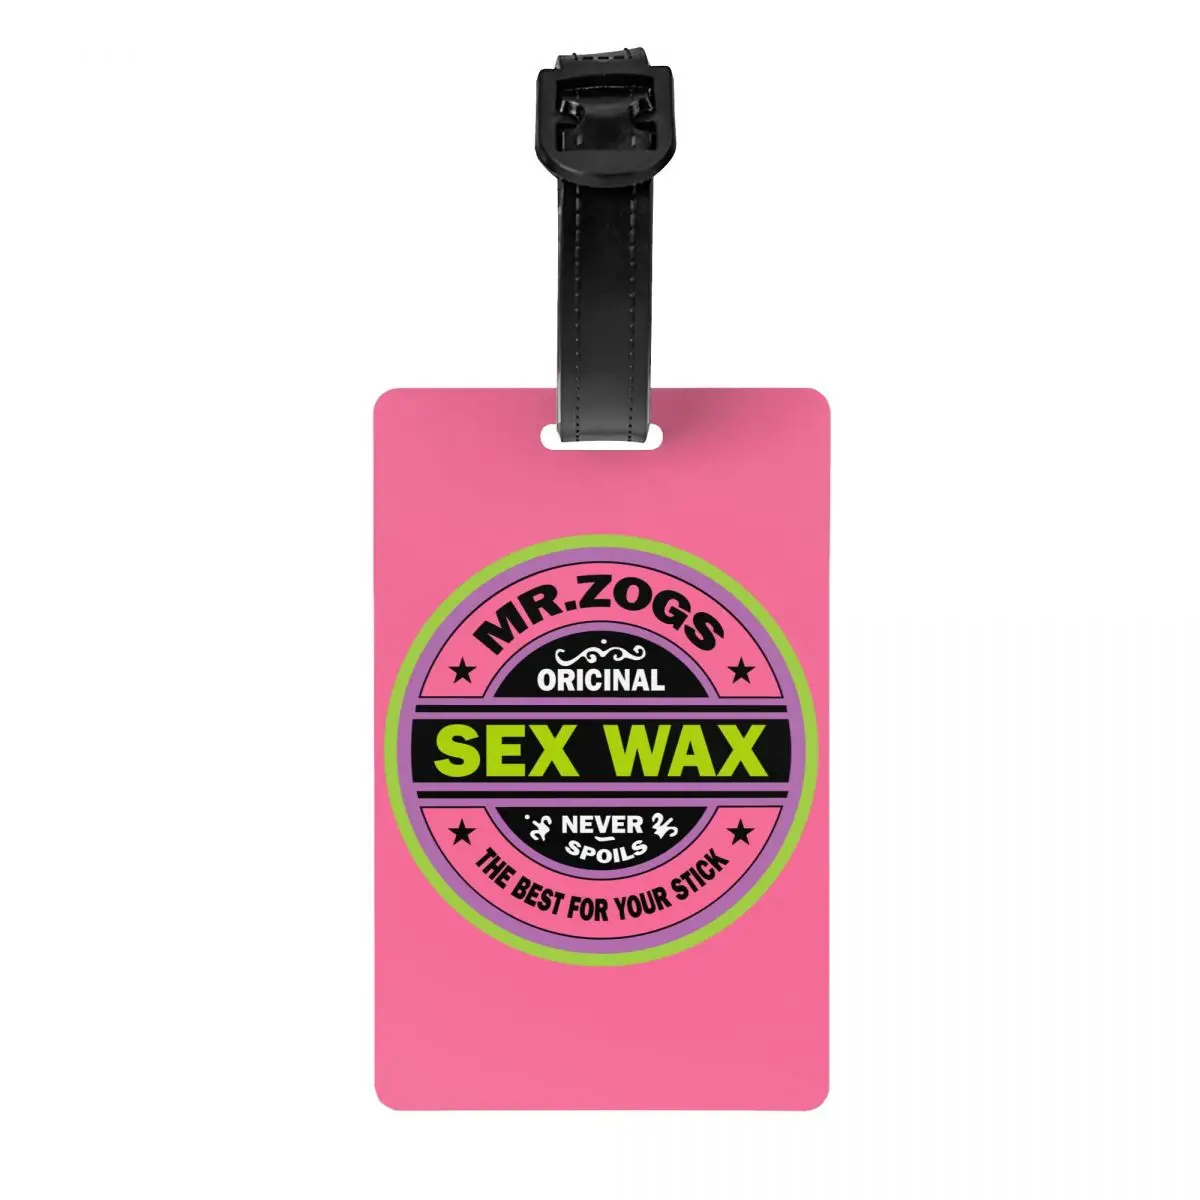 

Custom Mr Zogs Surfing Sex Wax Luggage Tag Privacy Protection Baggage Tags Travel Bag Labels Suitcase